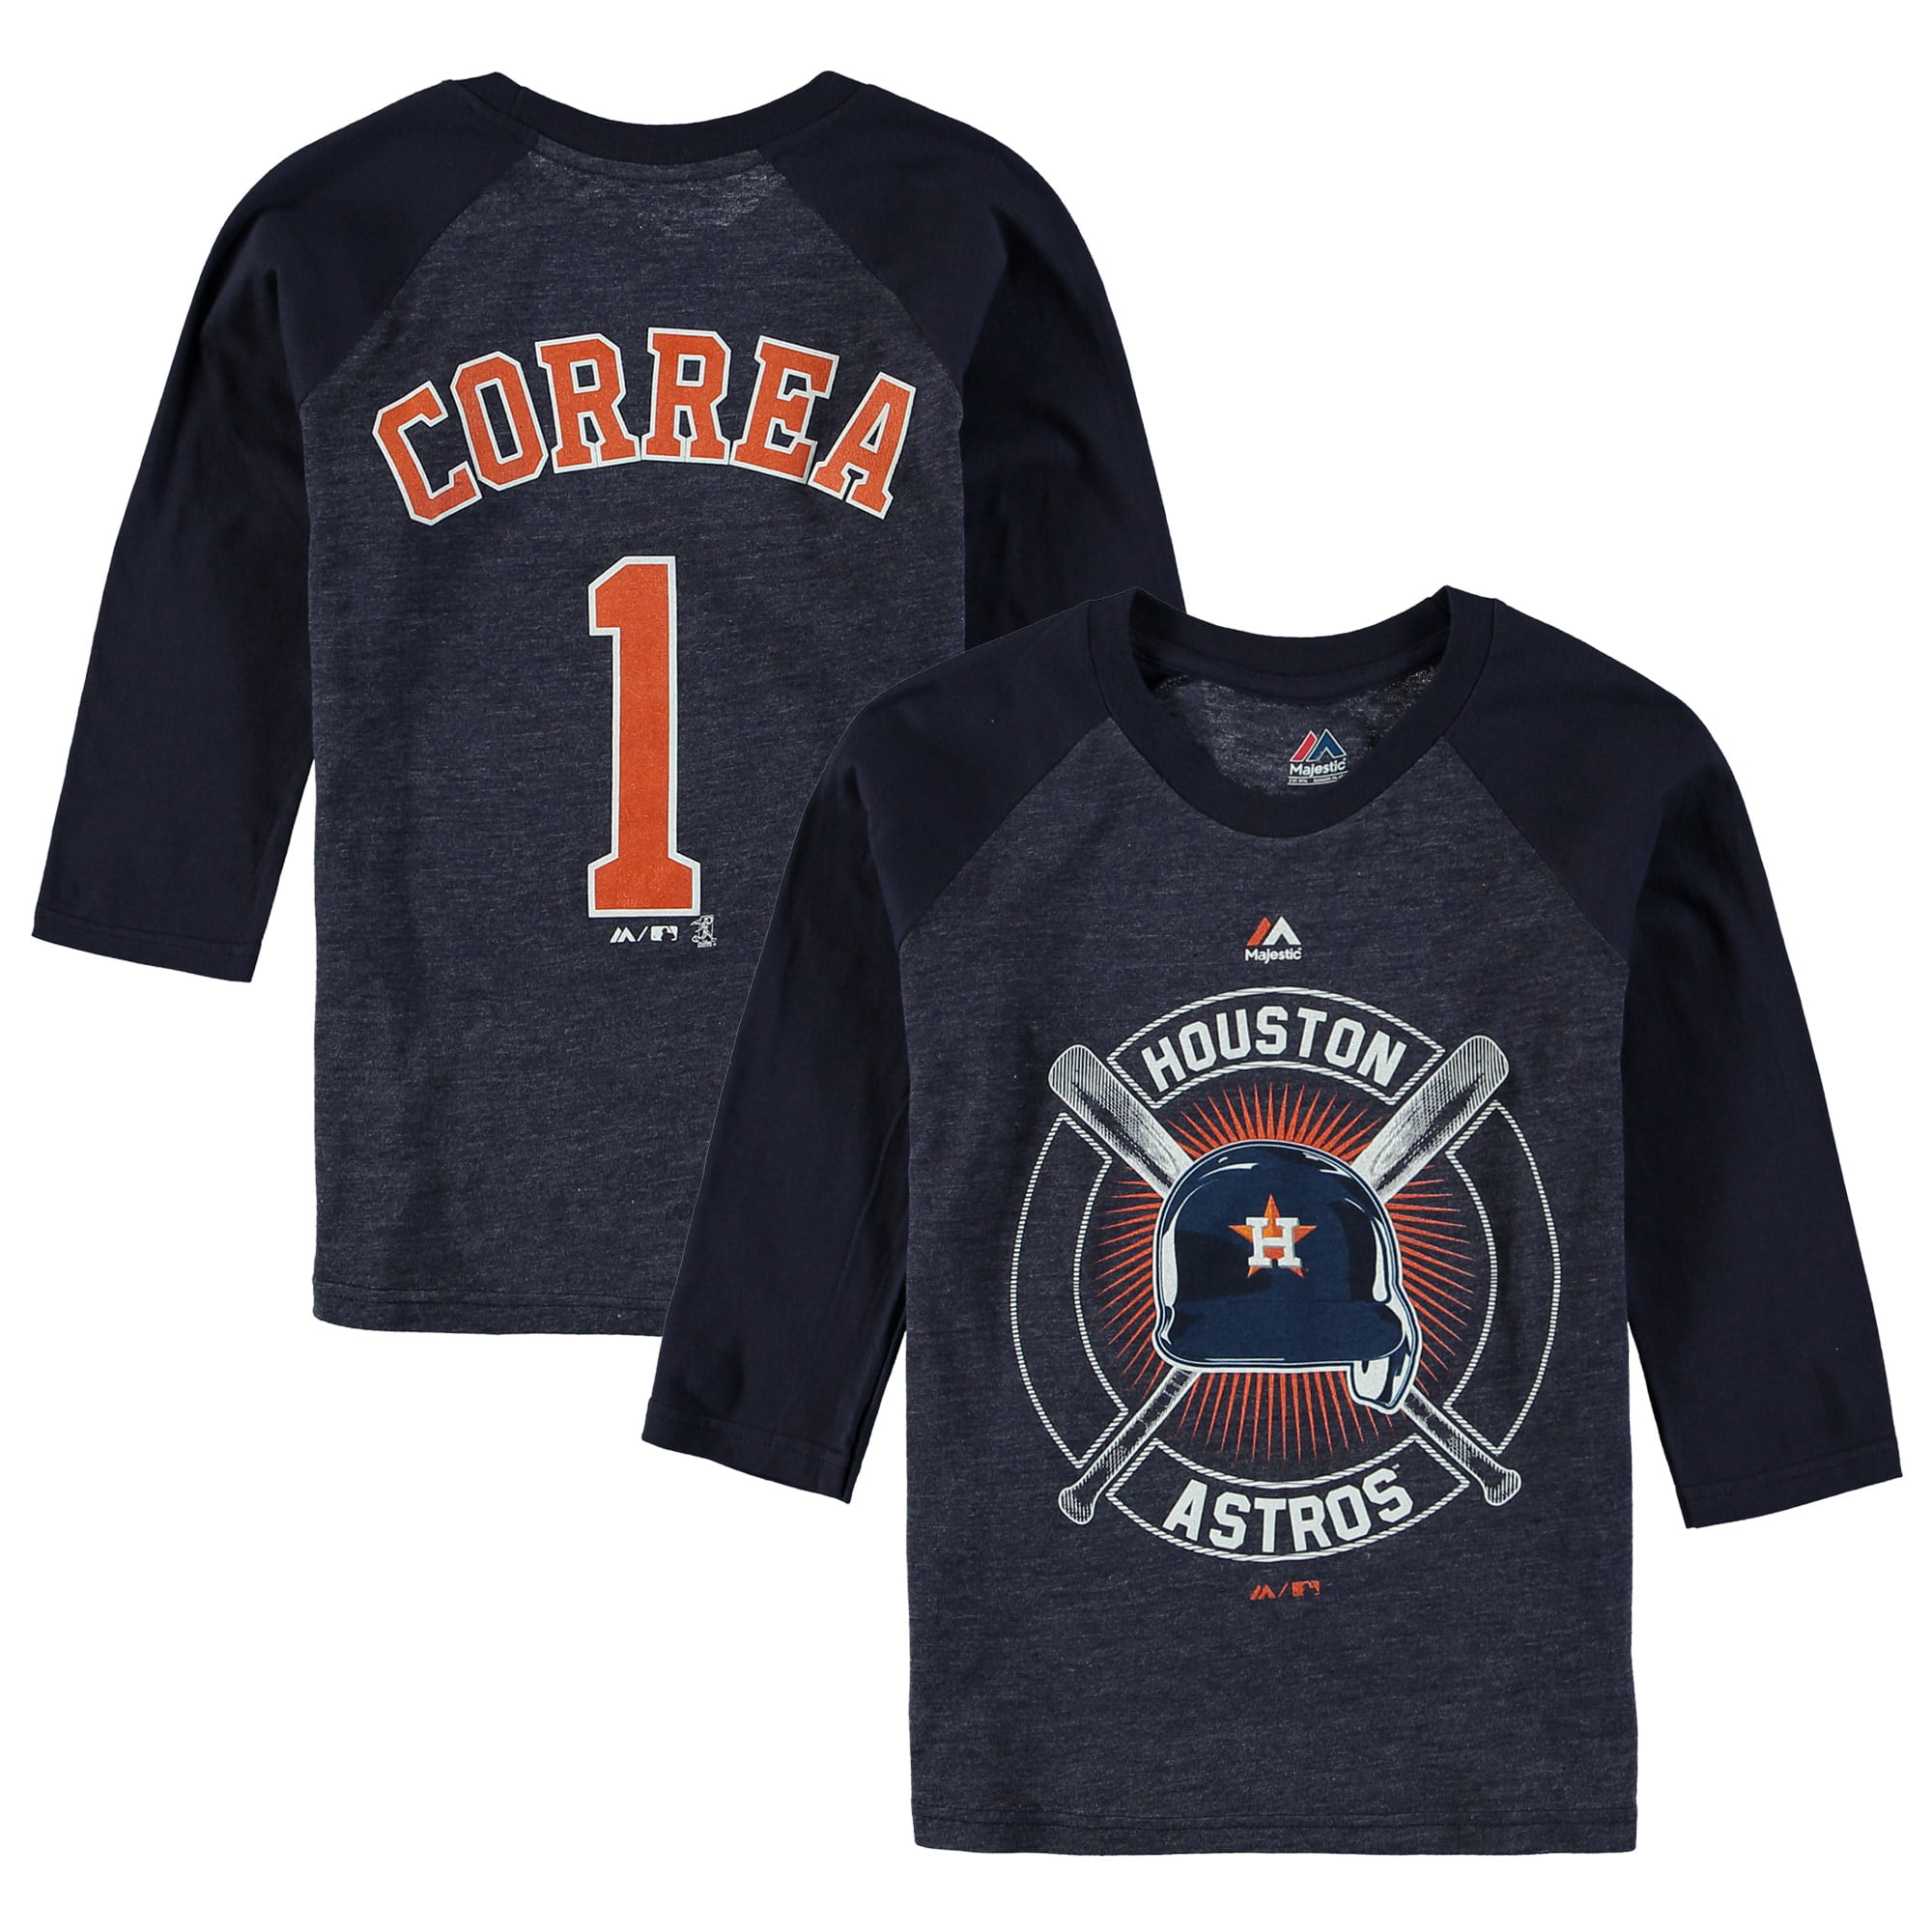 Outerstuff Carlos Correa Houston Astros Orange Net Youth Name and Number Shirt